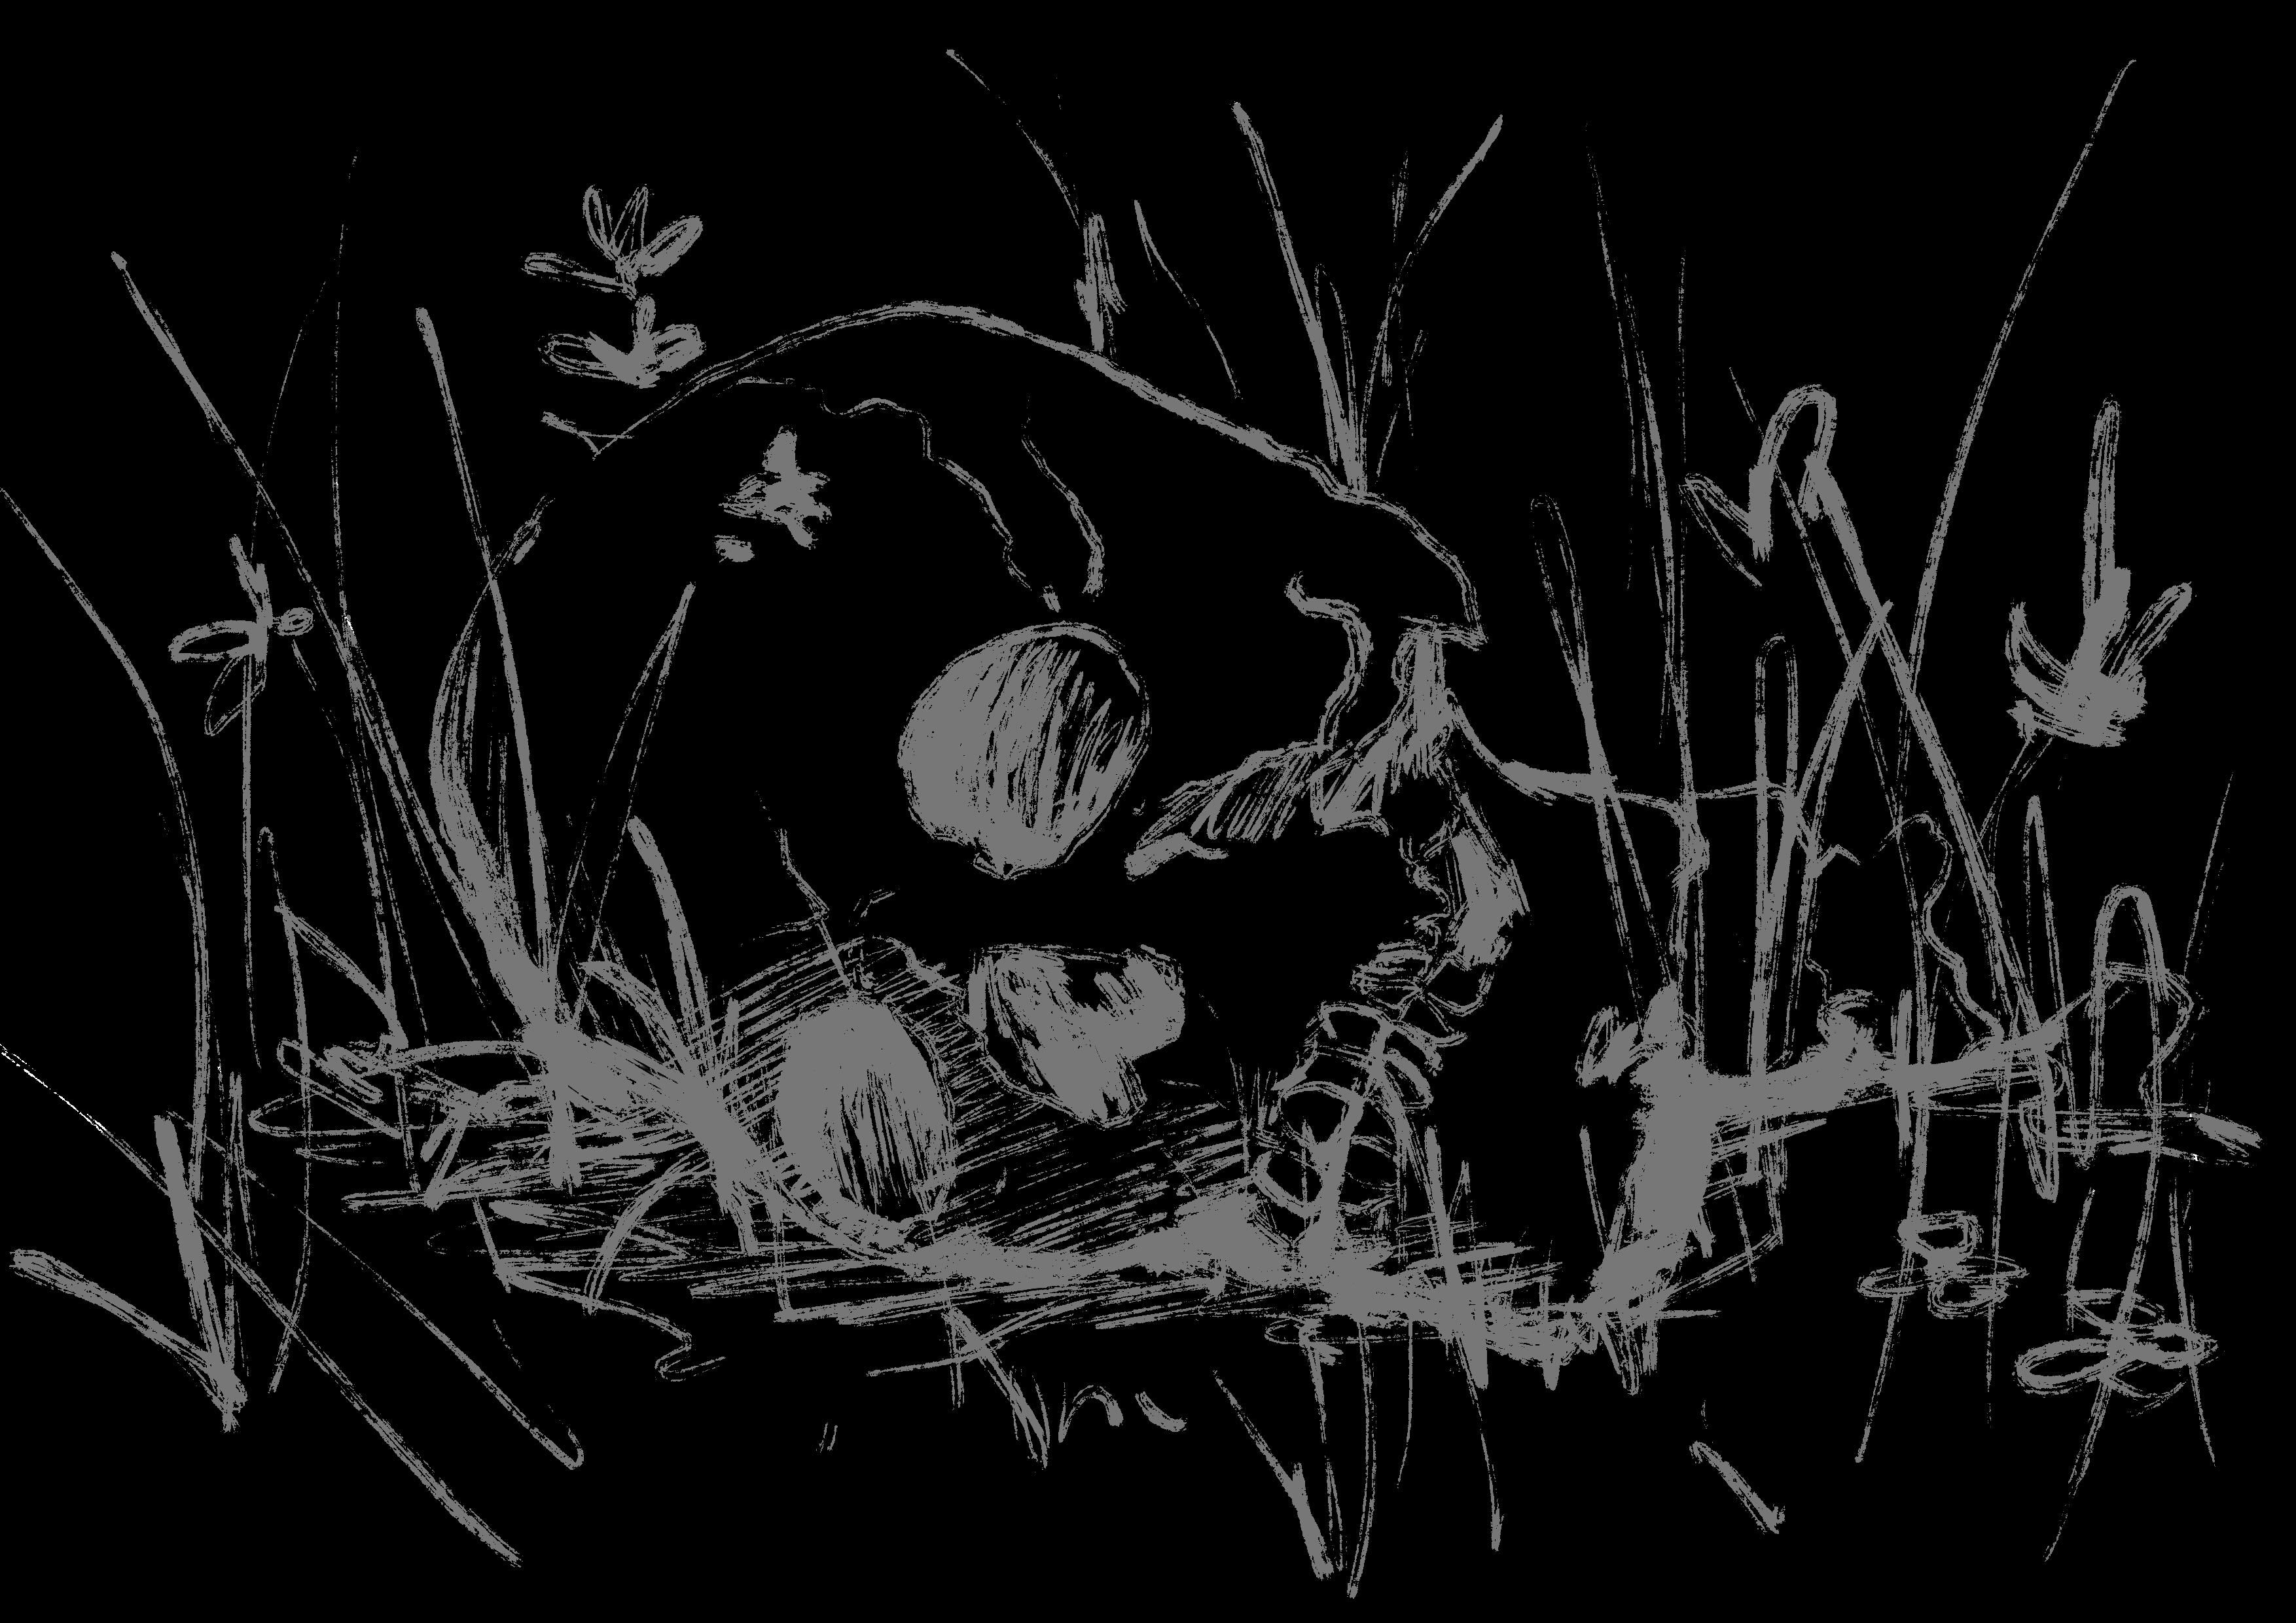 Black and grey illustration of a skull among flowers